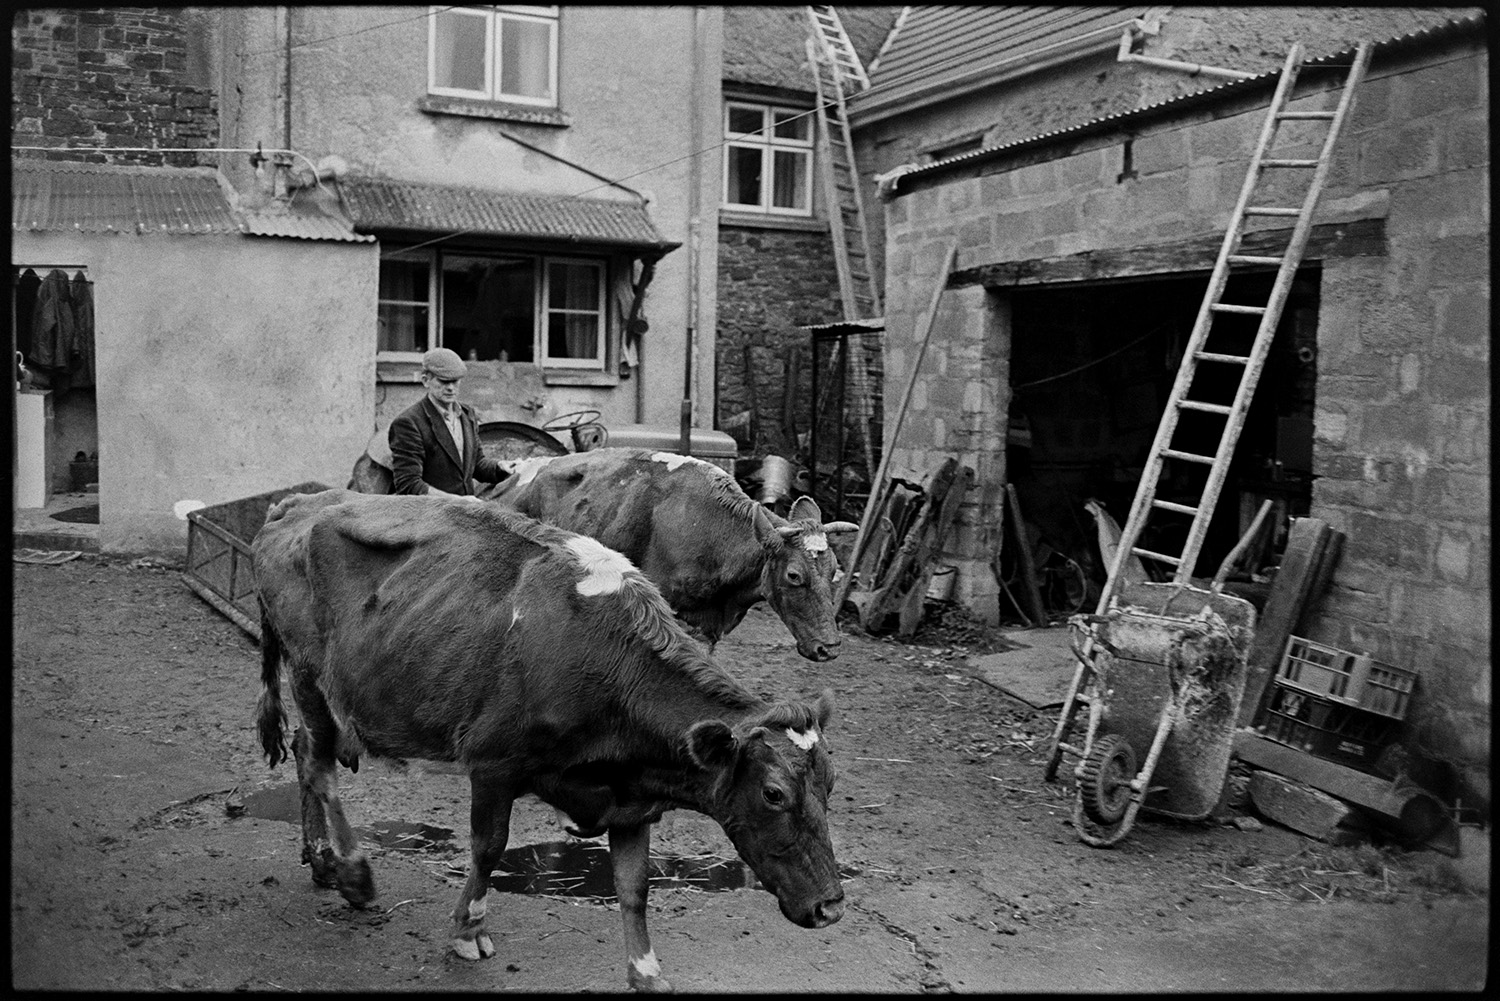 Farmer putting horned cows in barn to be milked. 
[Jim Woolacott herding two cows through the farmyard at Verdun, Atherington to be milked. One of the cows has horns. Ladders, milk crates and a wheelbarrow can be seen in the farmyard. A tractor and link box are parked by the farmhouse.]